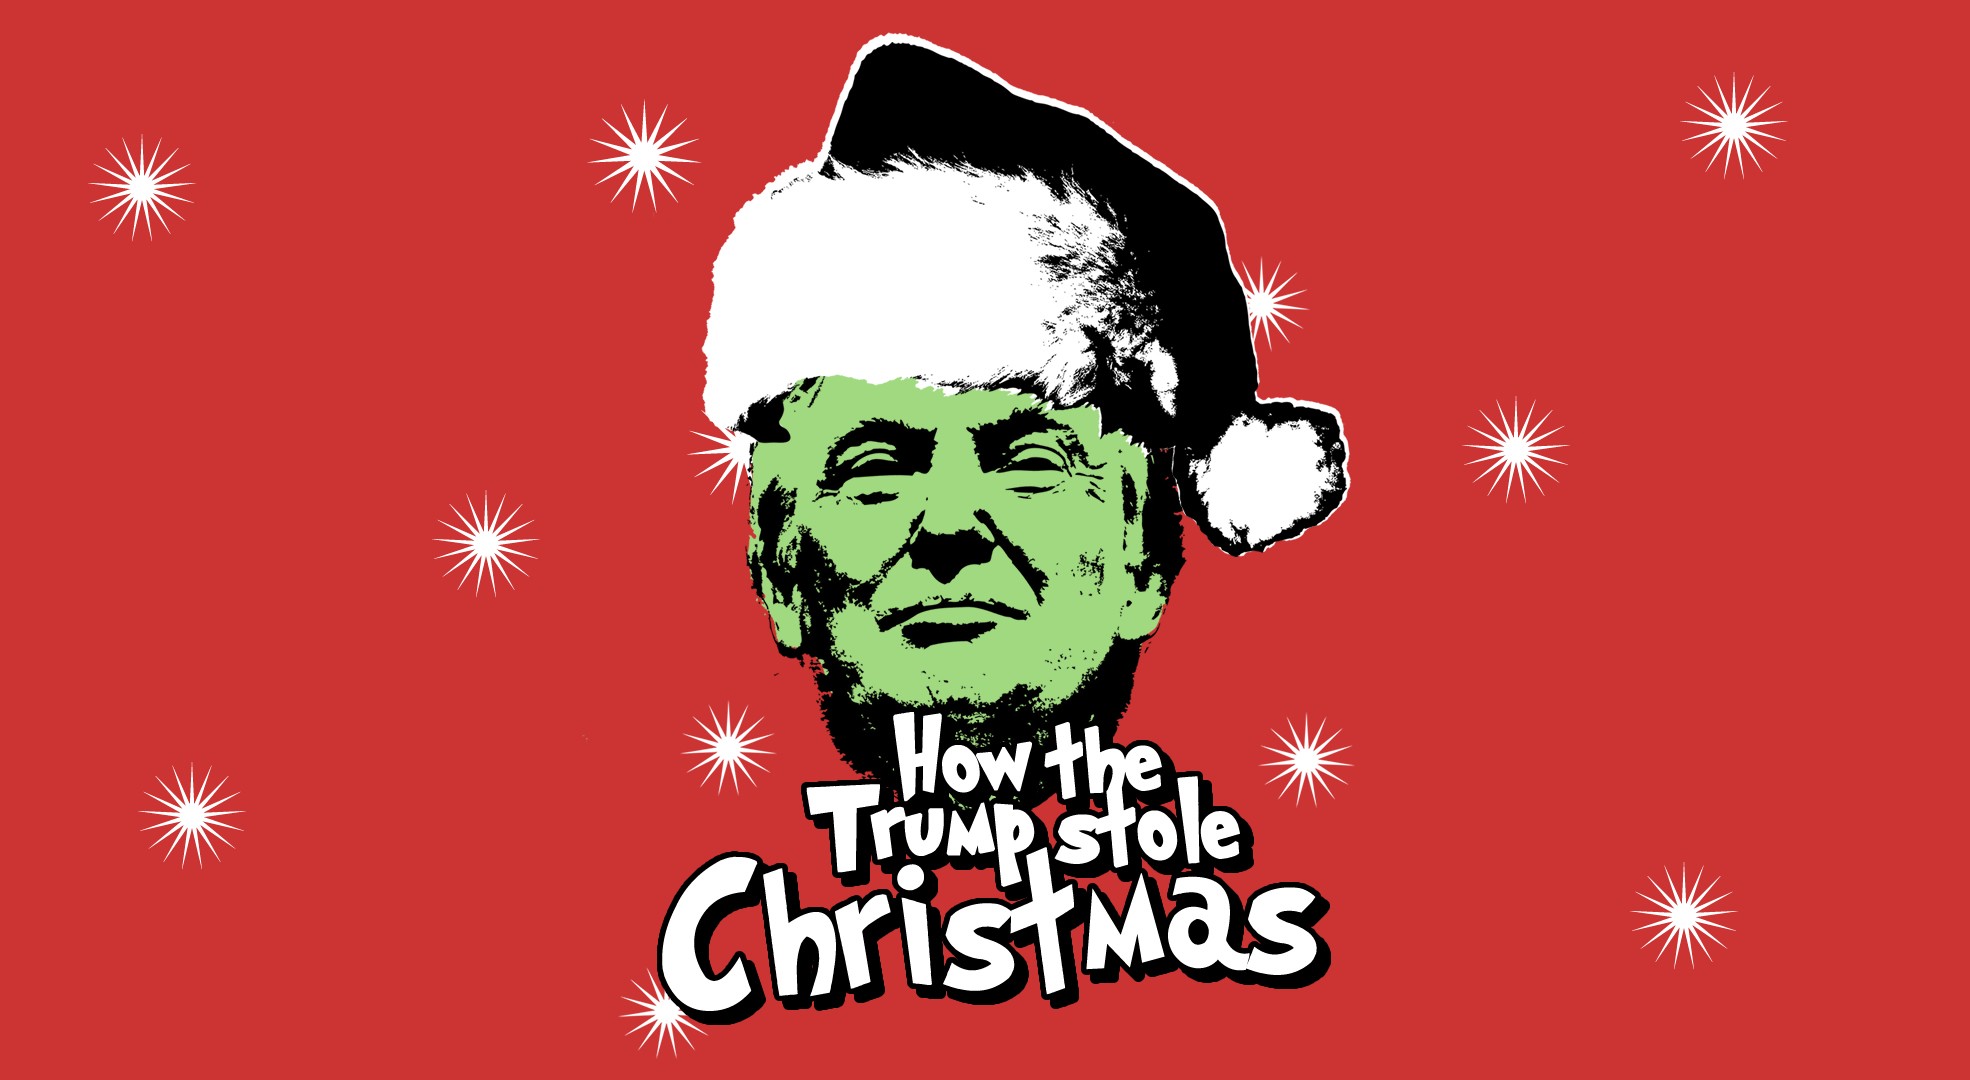 General 1970x1080 Christmas text red background Left Wing Donald Trump humor crossover red sarcasm propaganda political figure politics USA